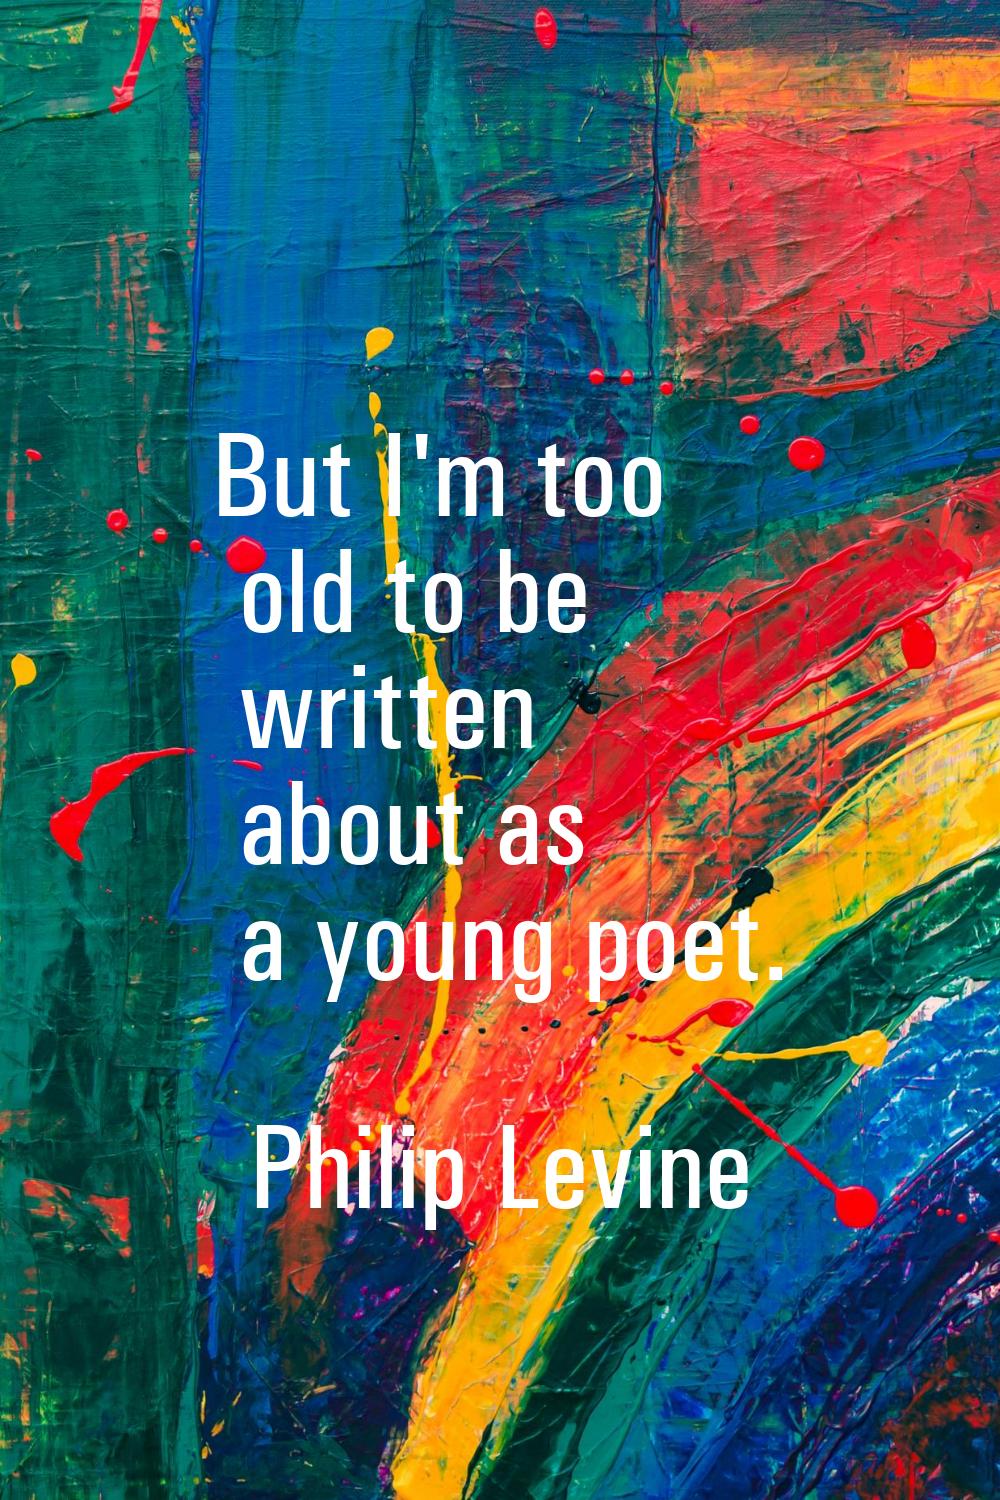 But I'm too old to be written about as a young poet.